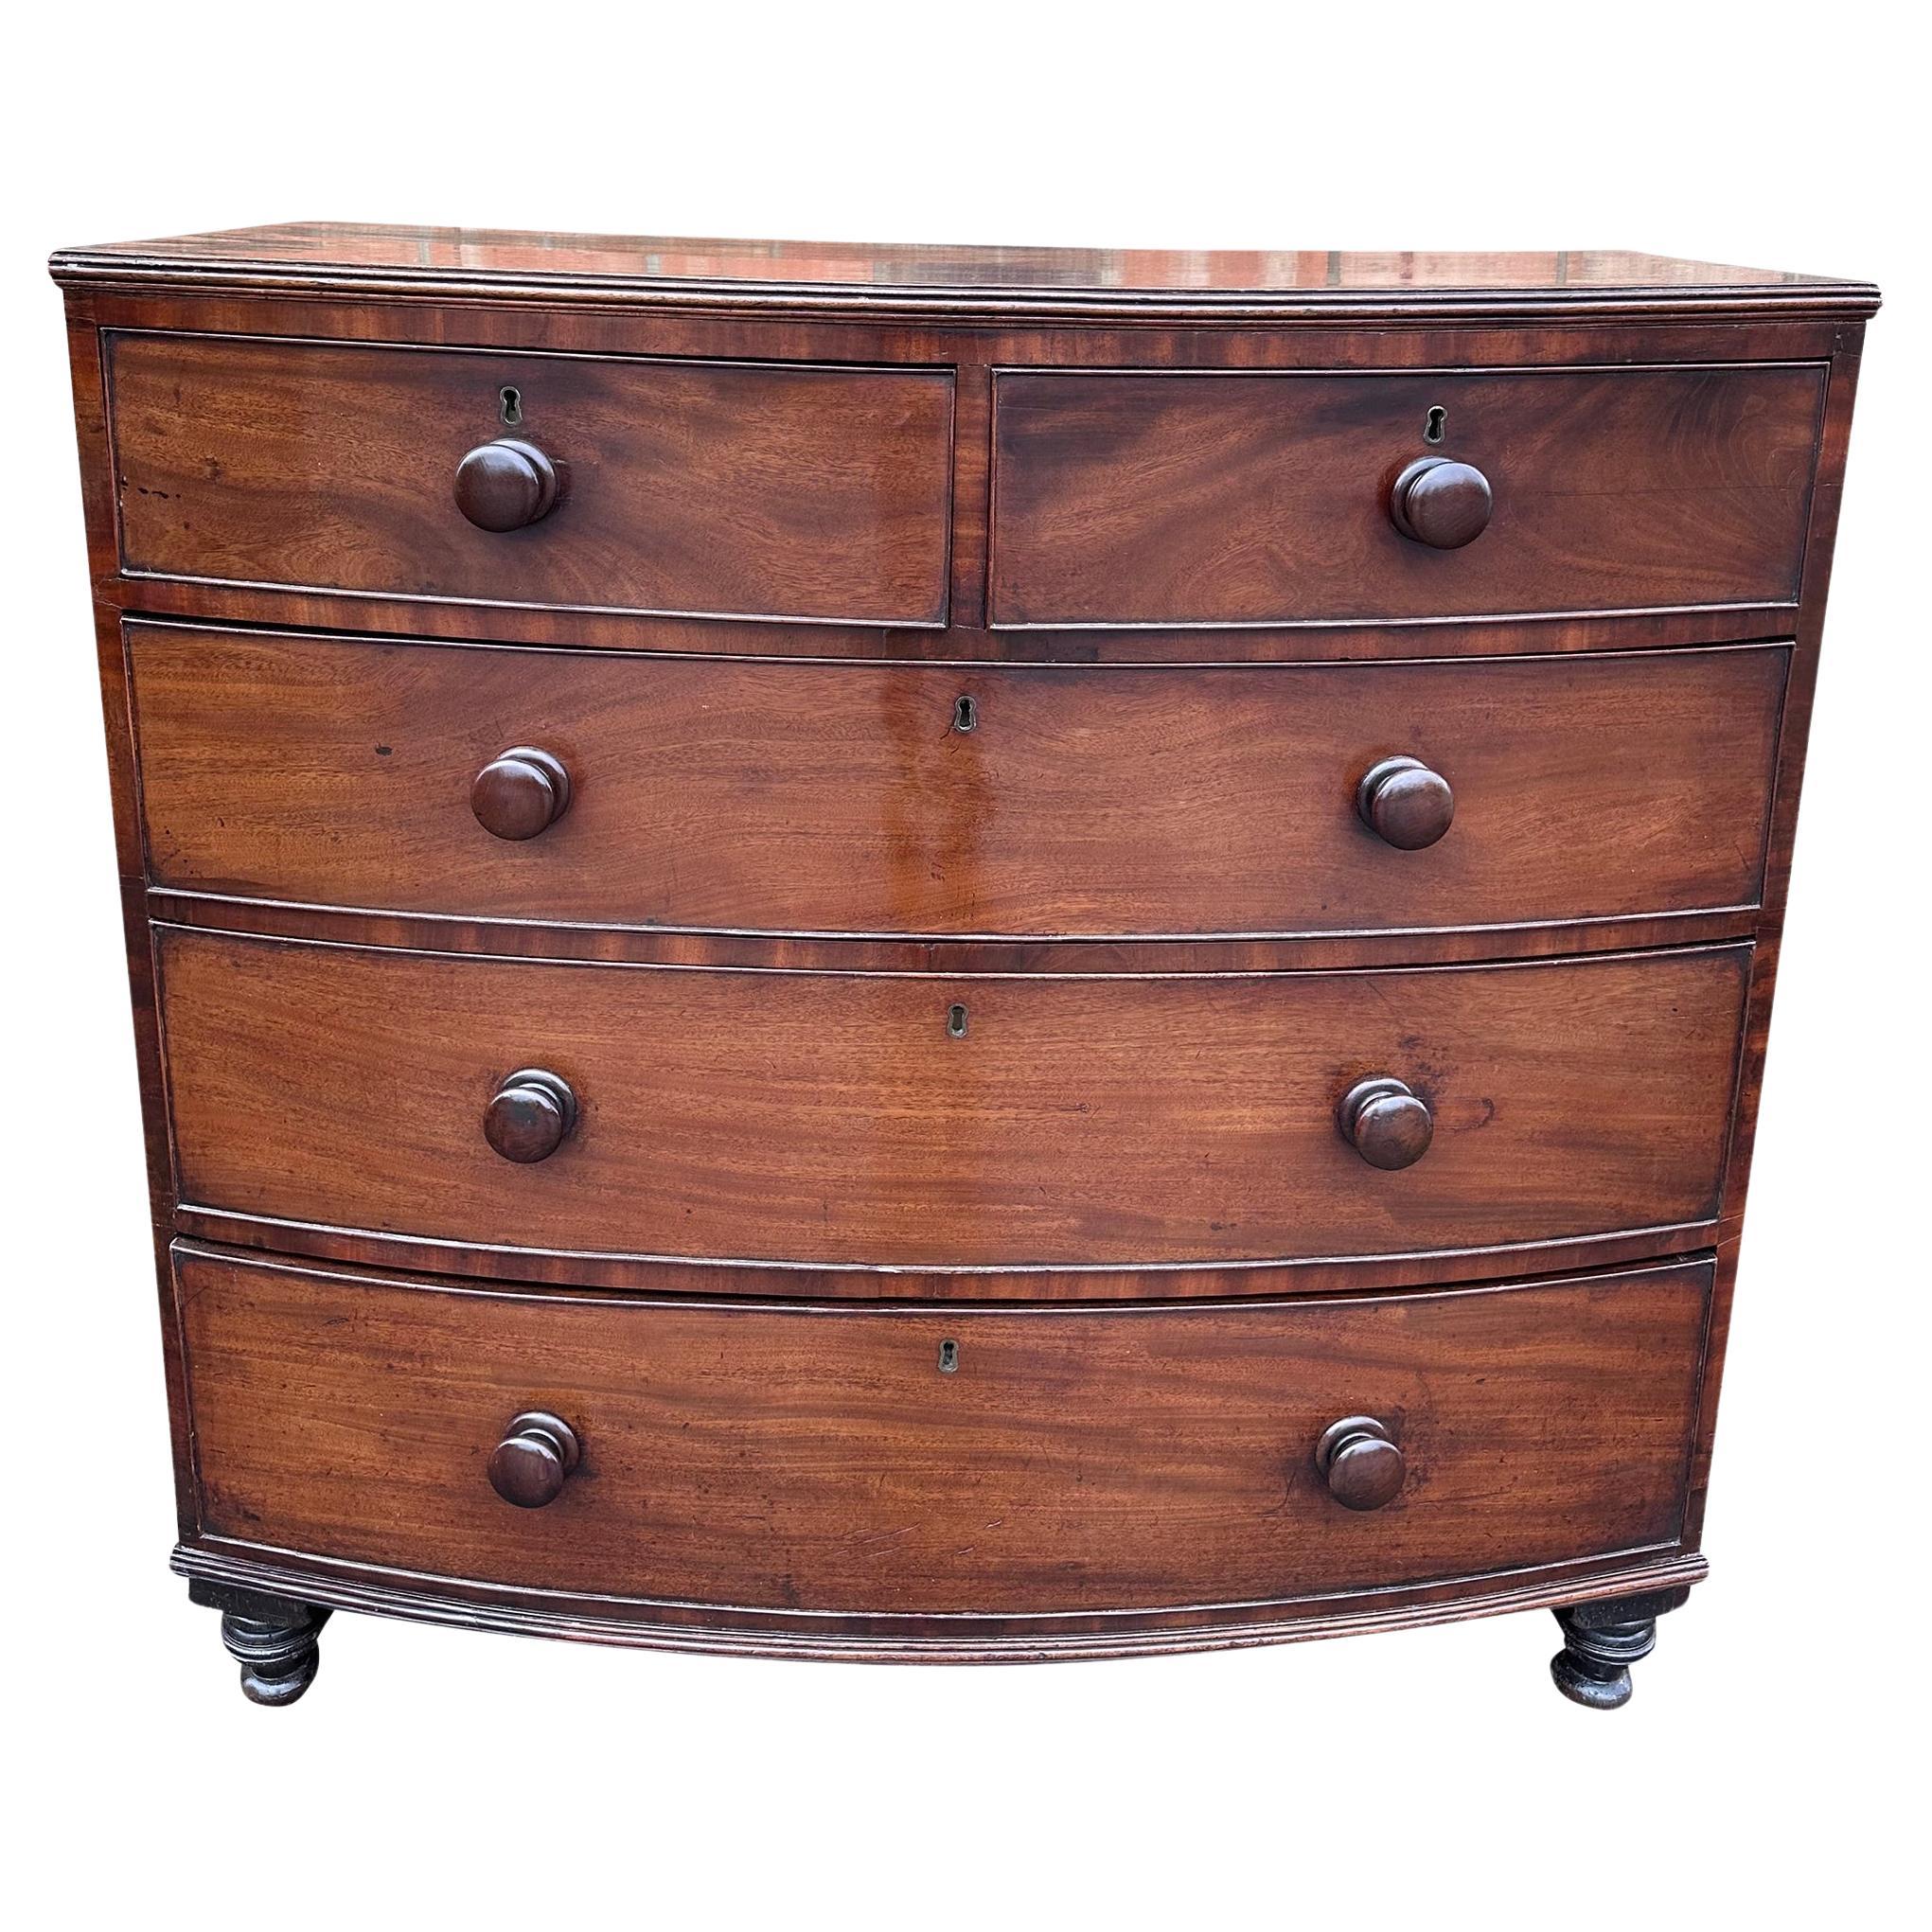 19th Century English Bow-Front Chest